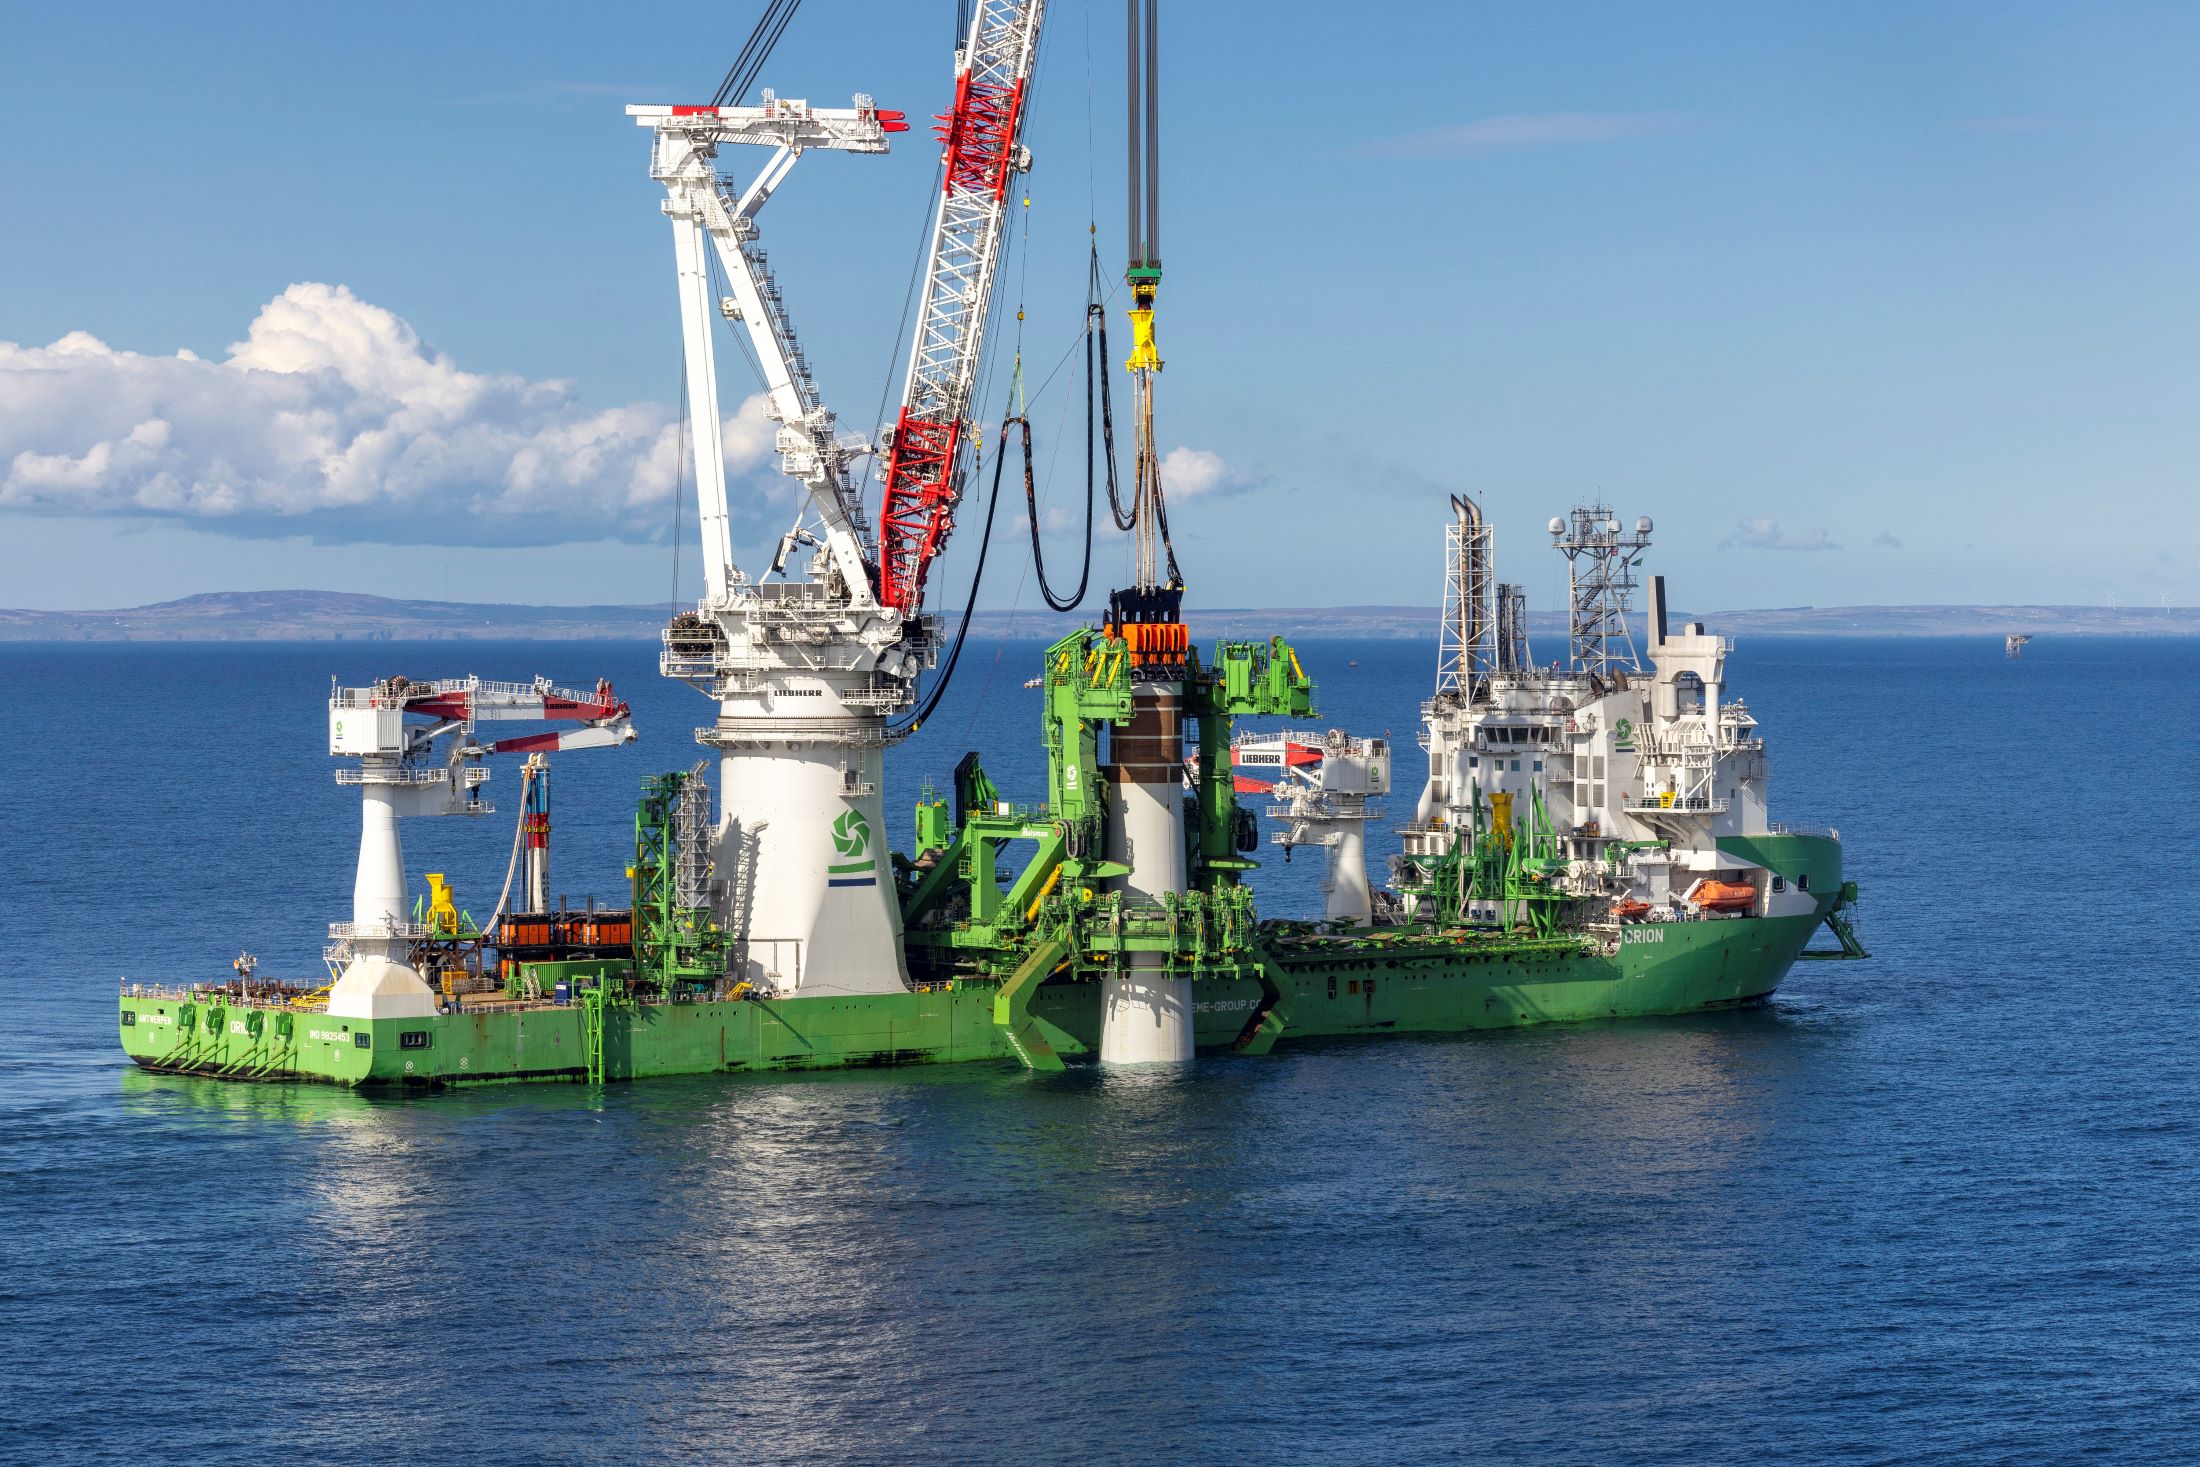 DEME’s offshore installation vessel ‘Orion’ successfully completes the near 15 MW turbine foundation installation project in Scotland and heads to US